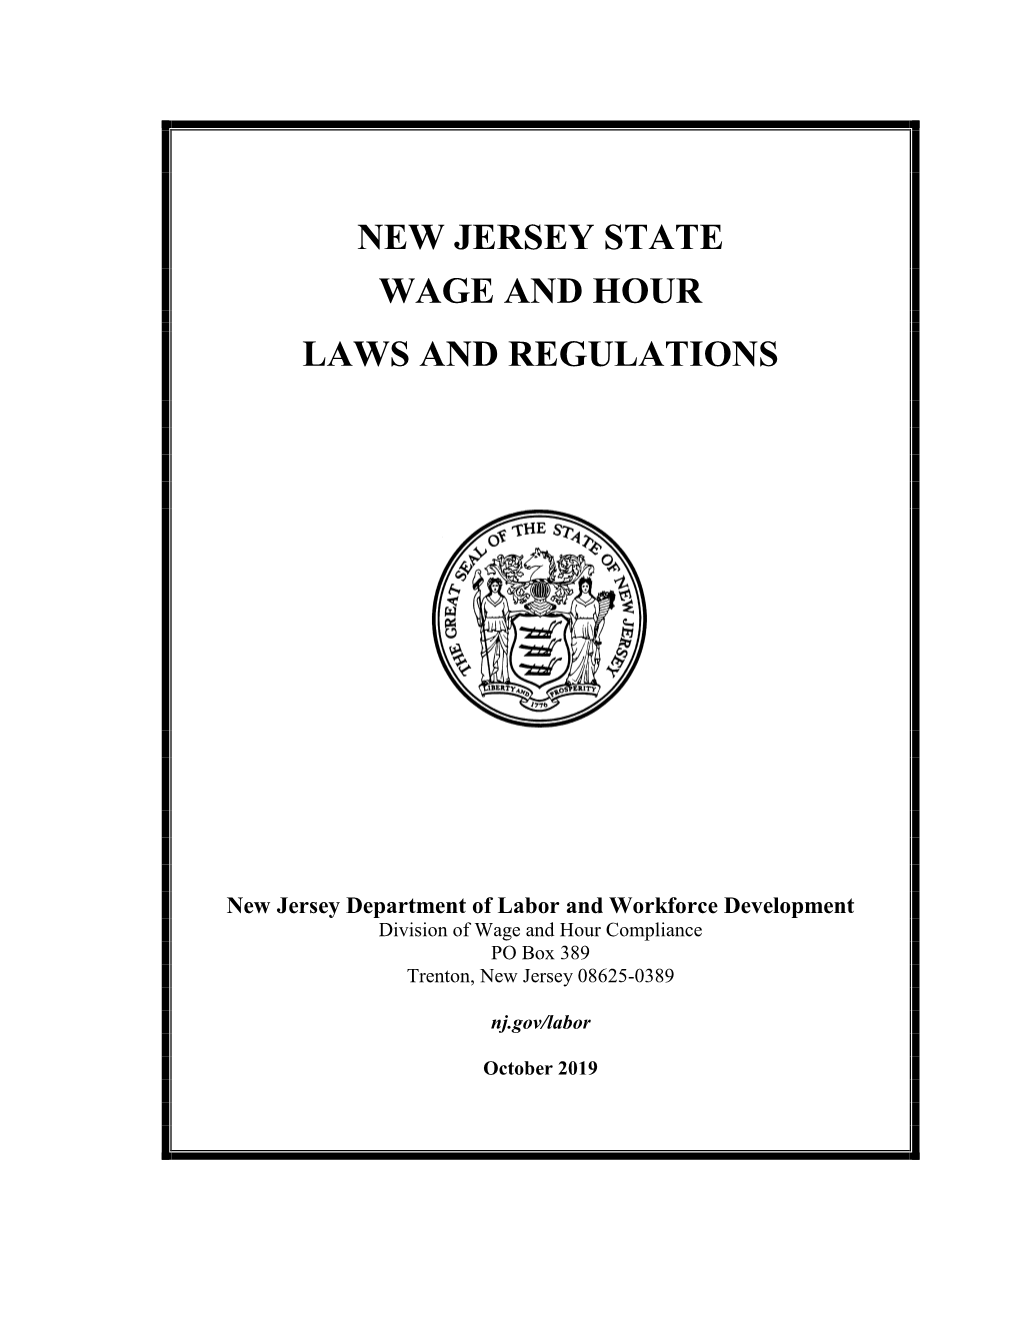 New Jersey State Wage and Hour Laws and Regulations